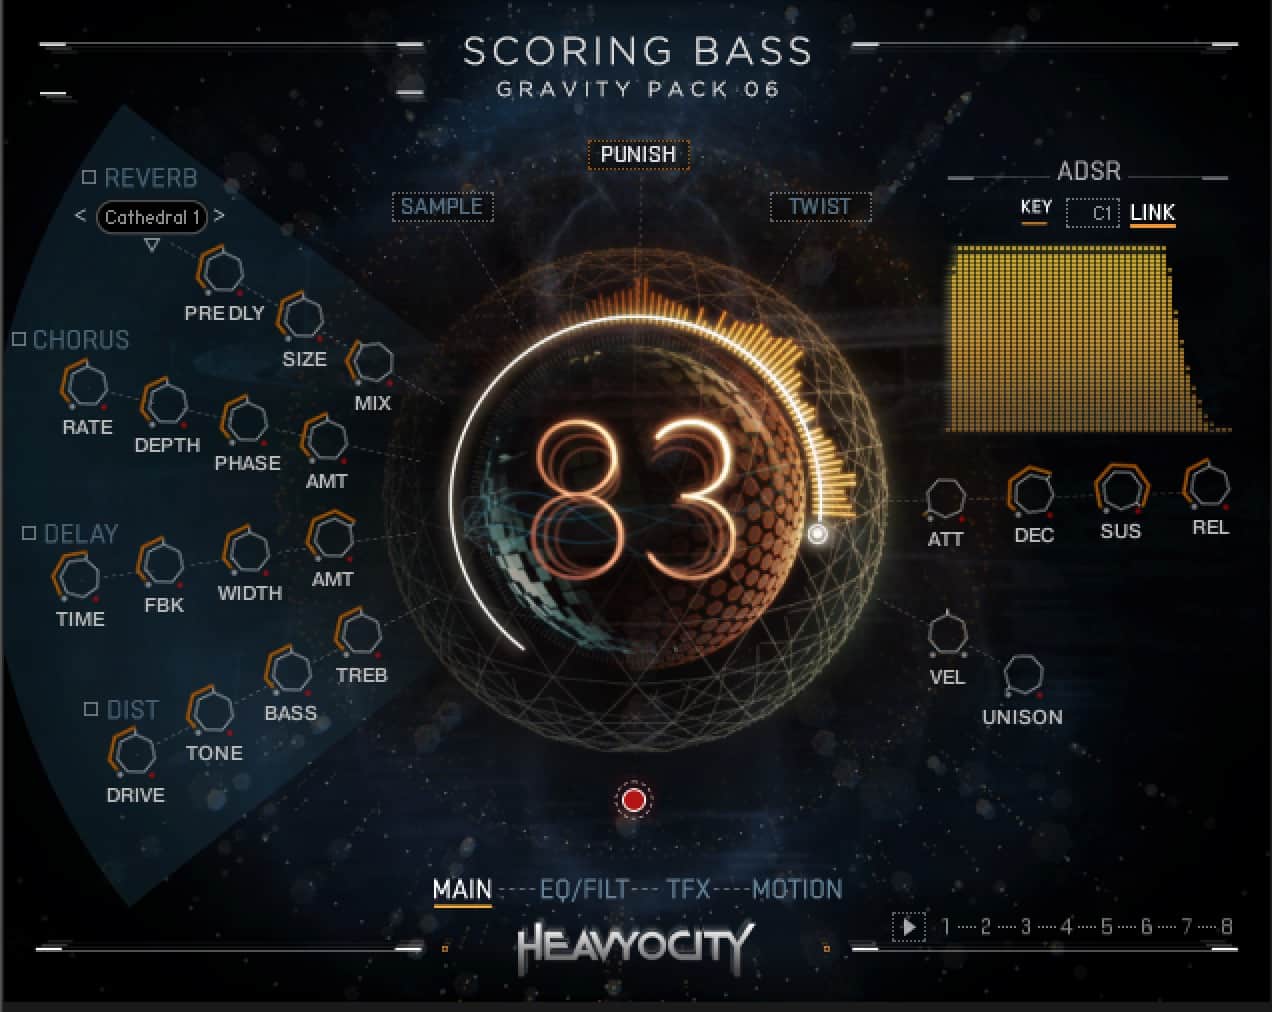 Scoring Bass Review - Full-Scale Low-End Sound Design and Bass Instrument by Heavyocity